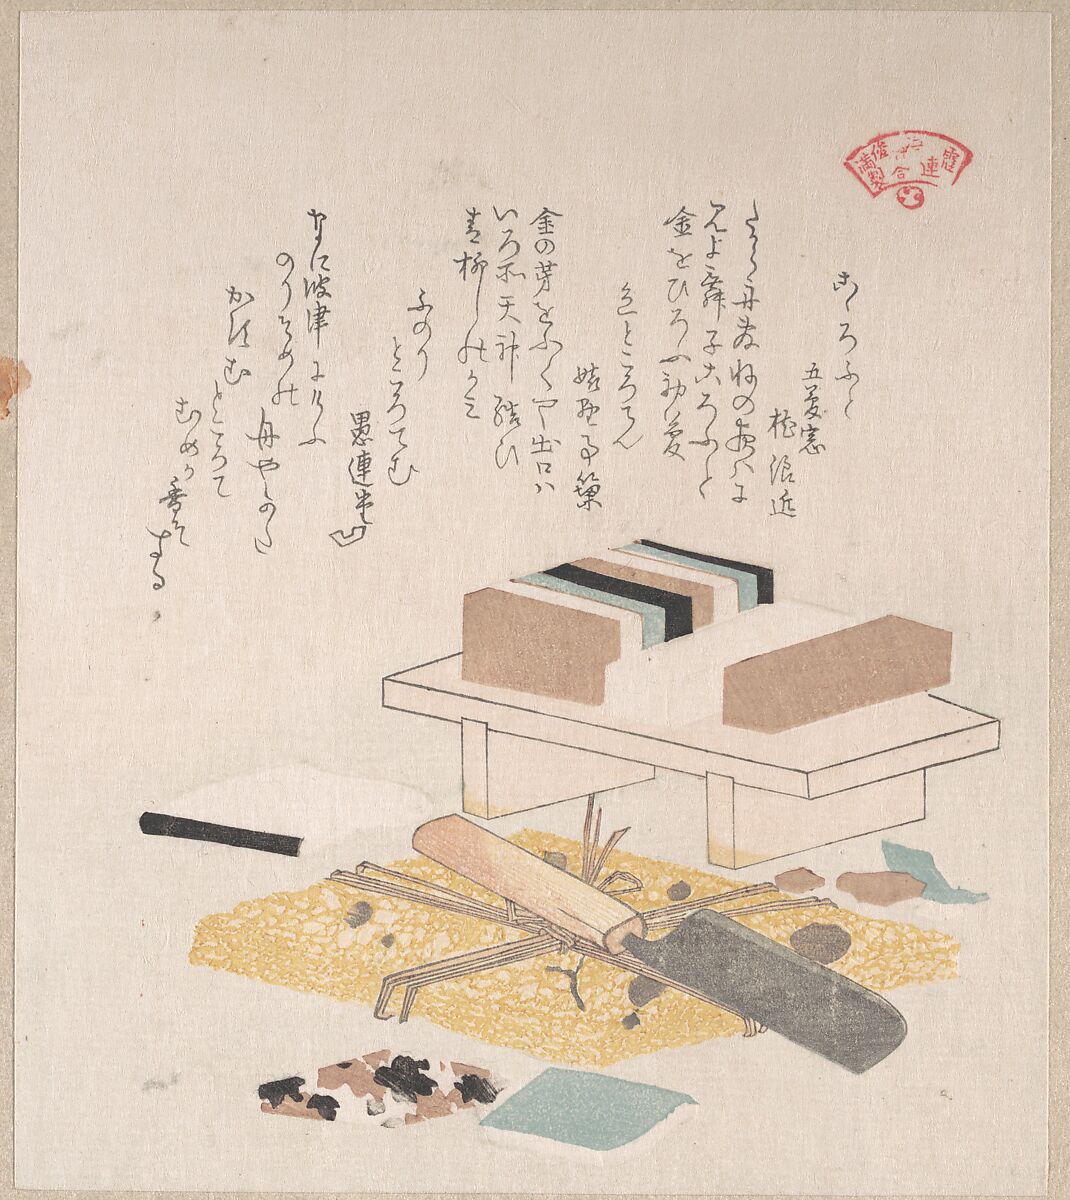 Seaweed Food and Kitchen Utensils, Kubo Shunman (Japanese, 1757–1820), Part of an album of woodblock prints (surimono); ink and color on paper, Japan 